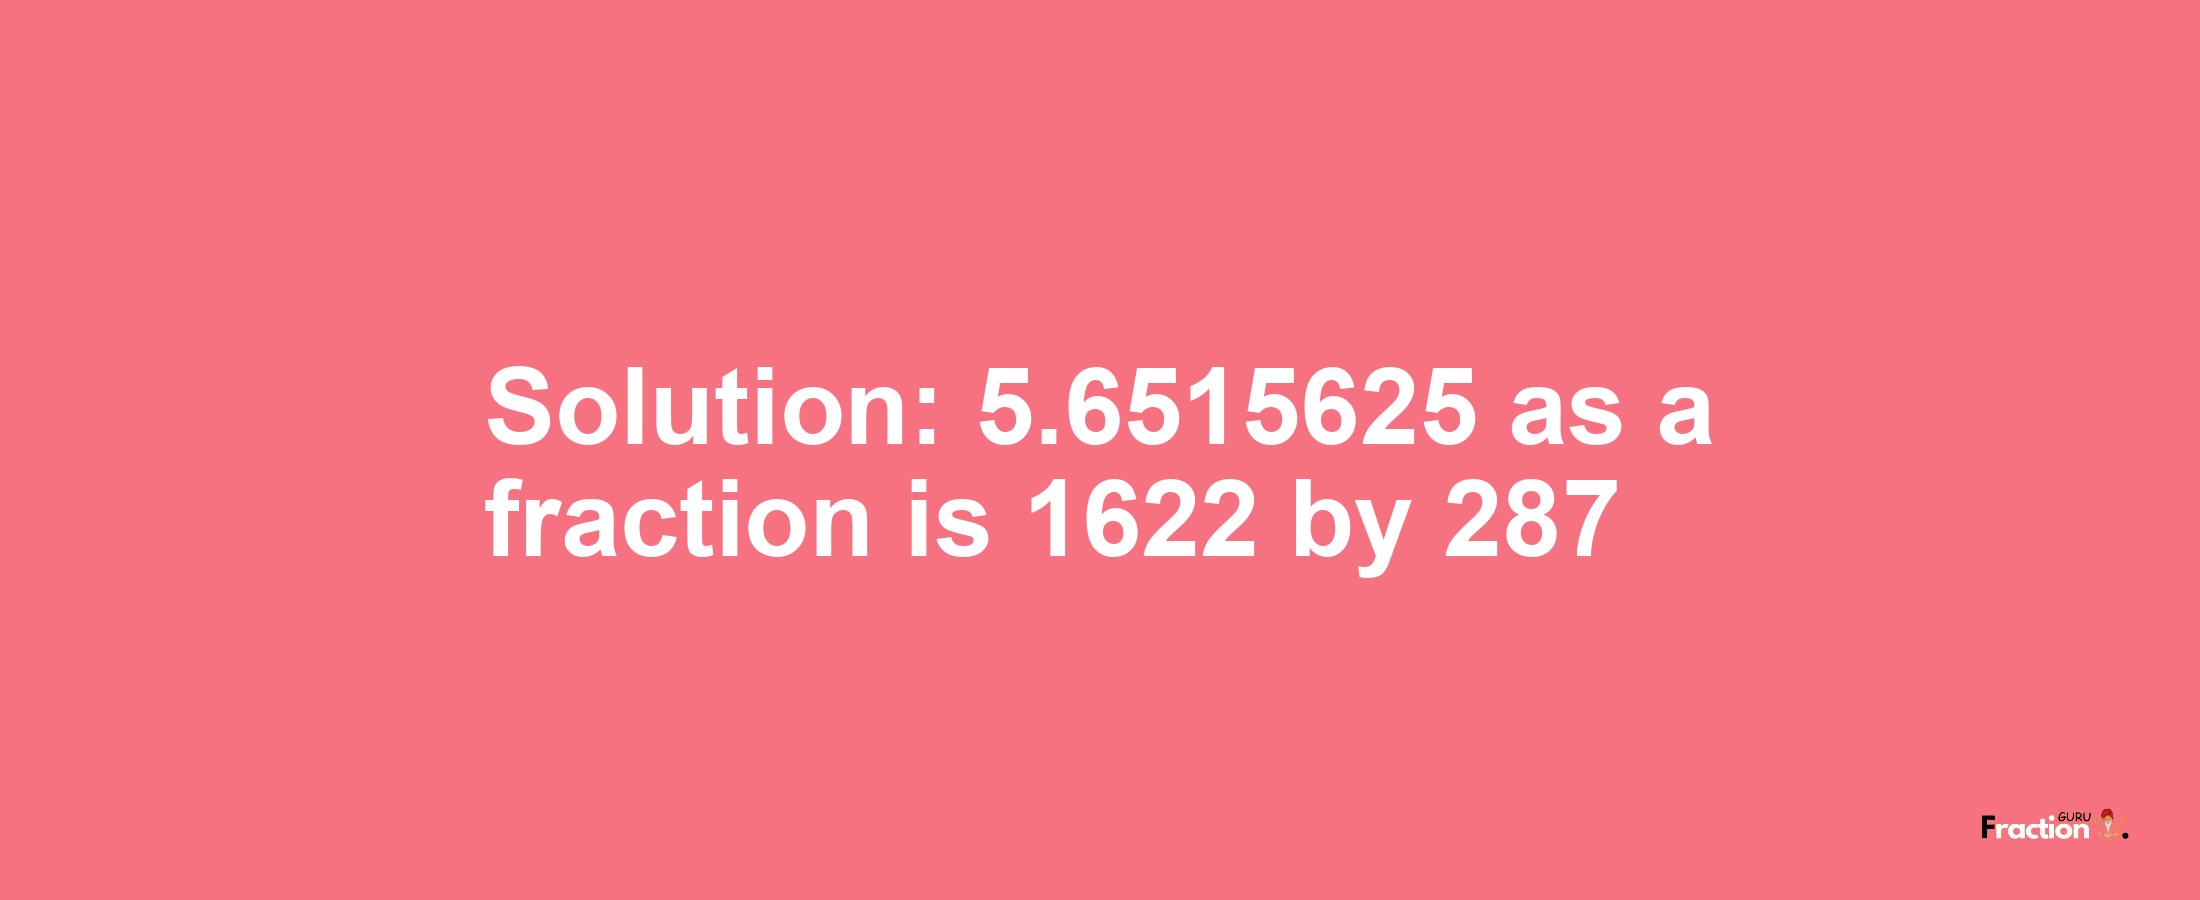 Solution:5.6515625 as a fraction is 1622/287